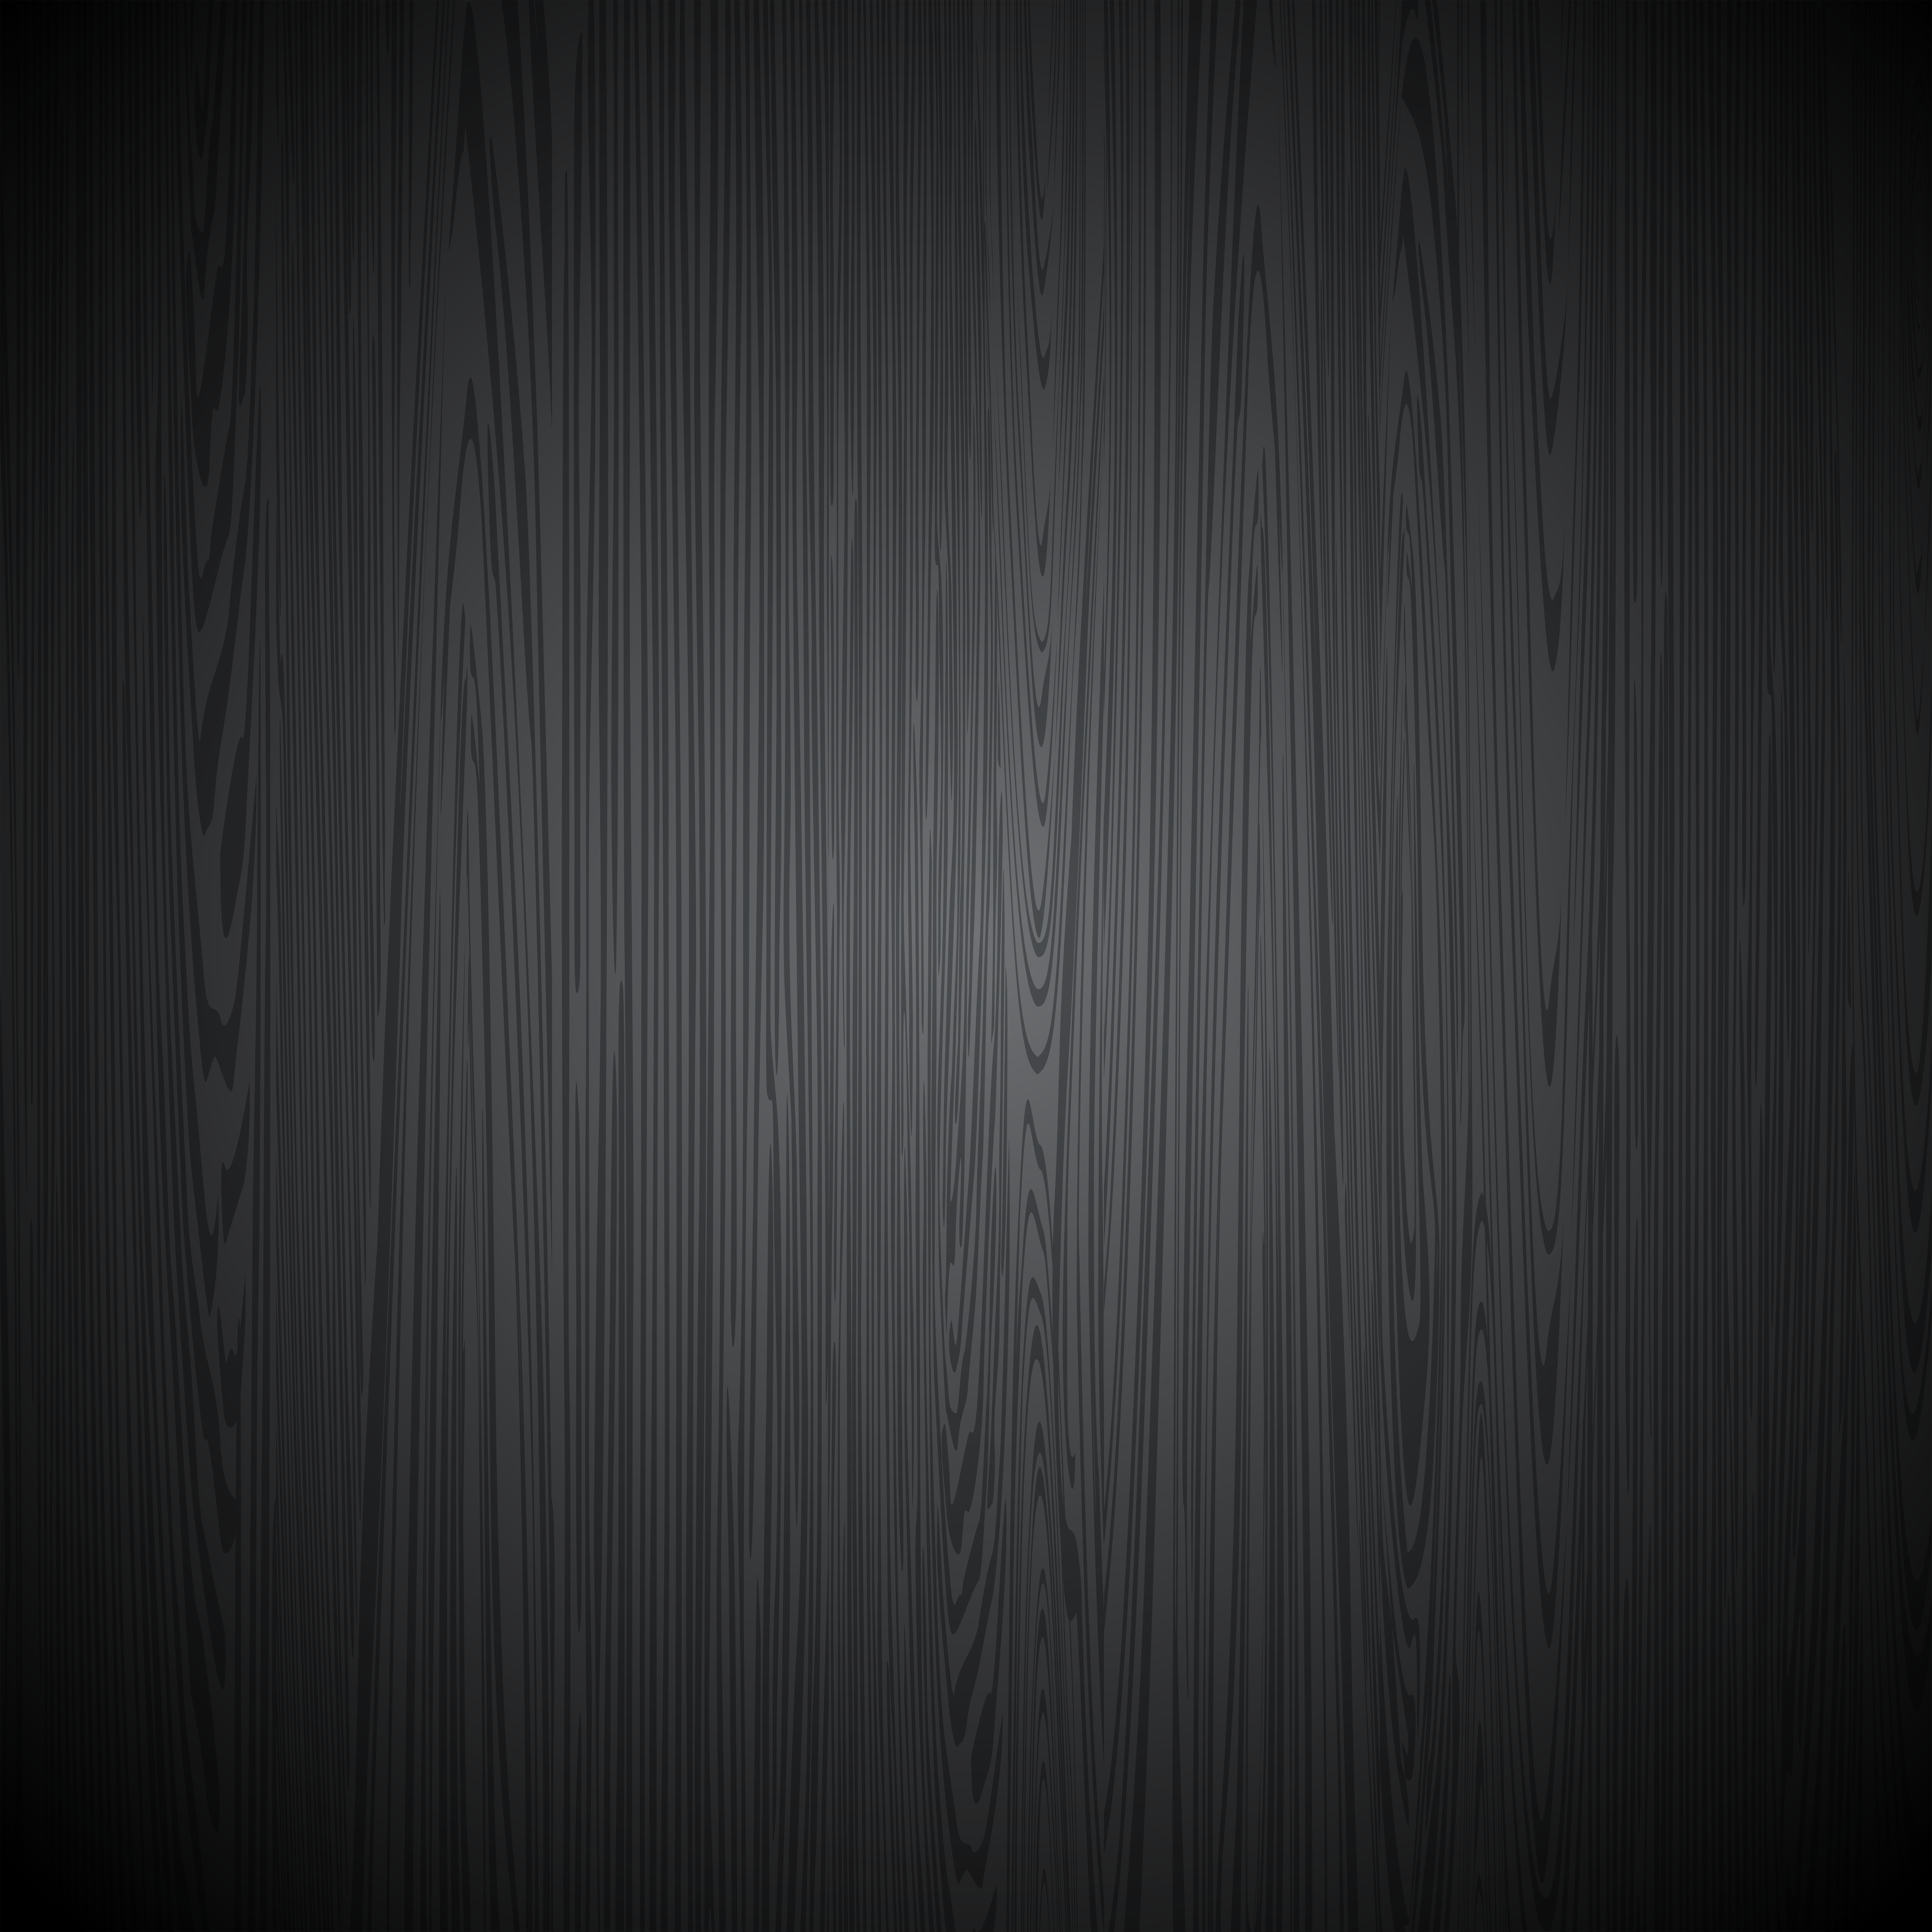 Black Wood Background Gallery Yopriceville High Quality